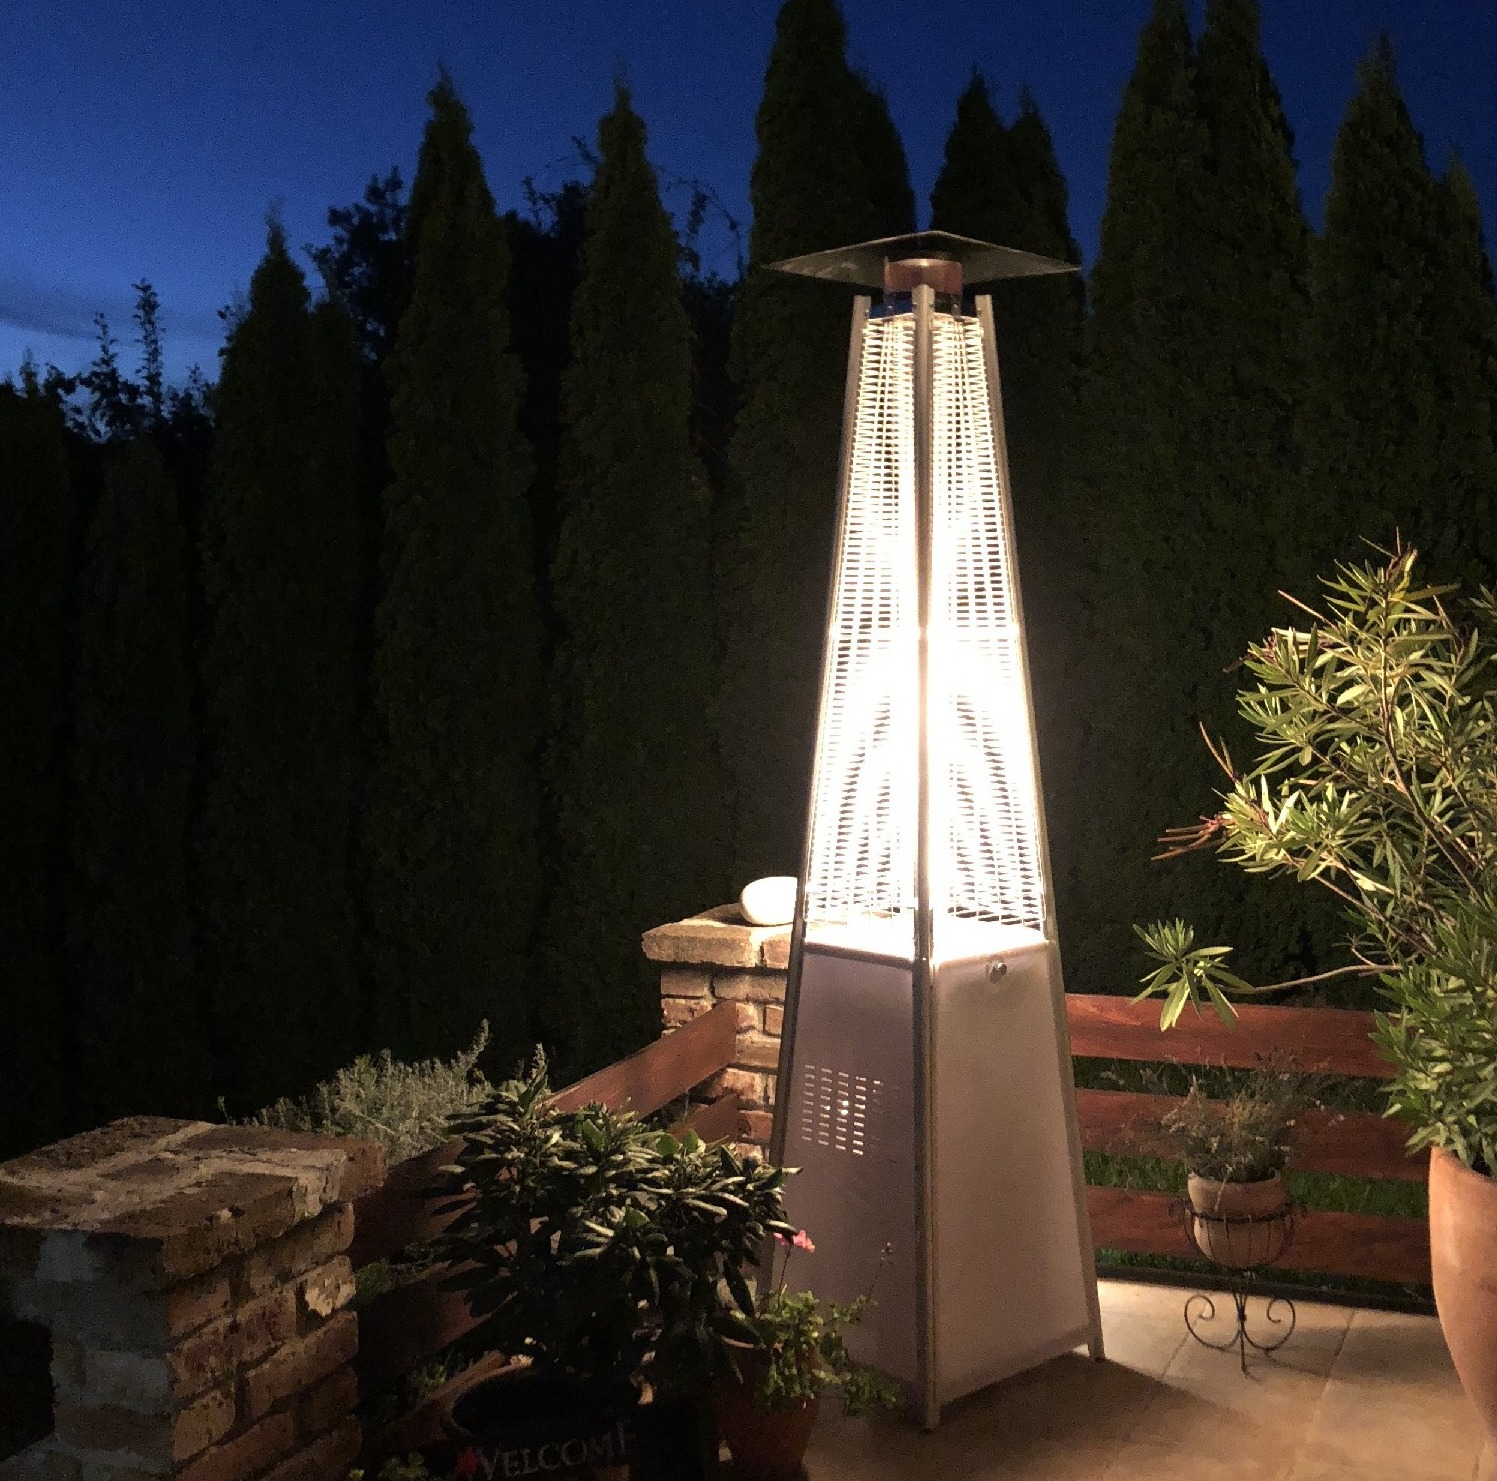 Vancouver Patio Gas Glow Heater With Led Lighting with sizing 1497 X 1481